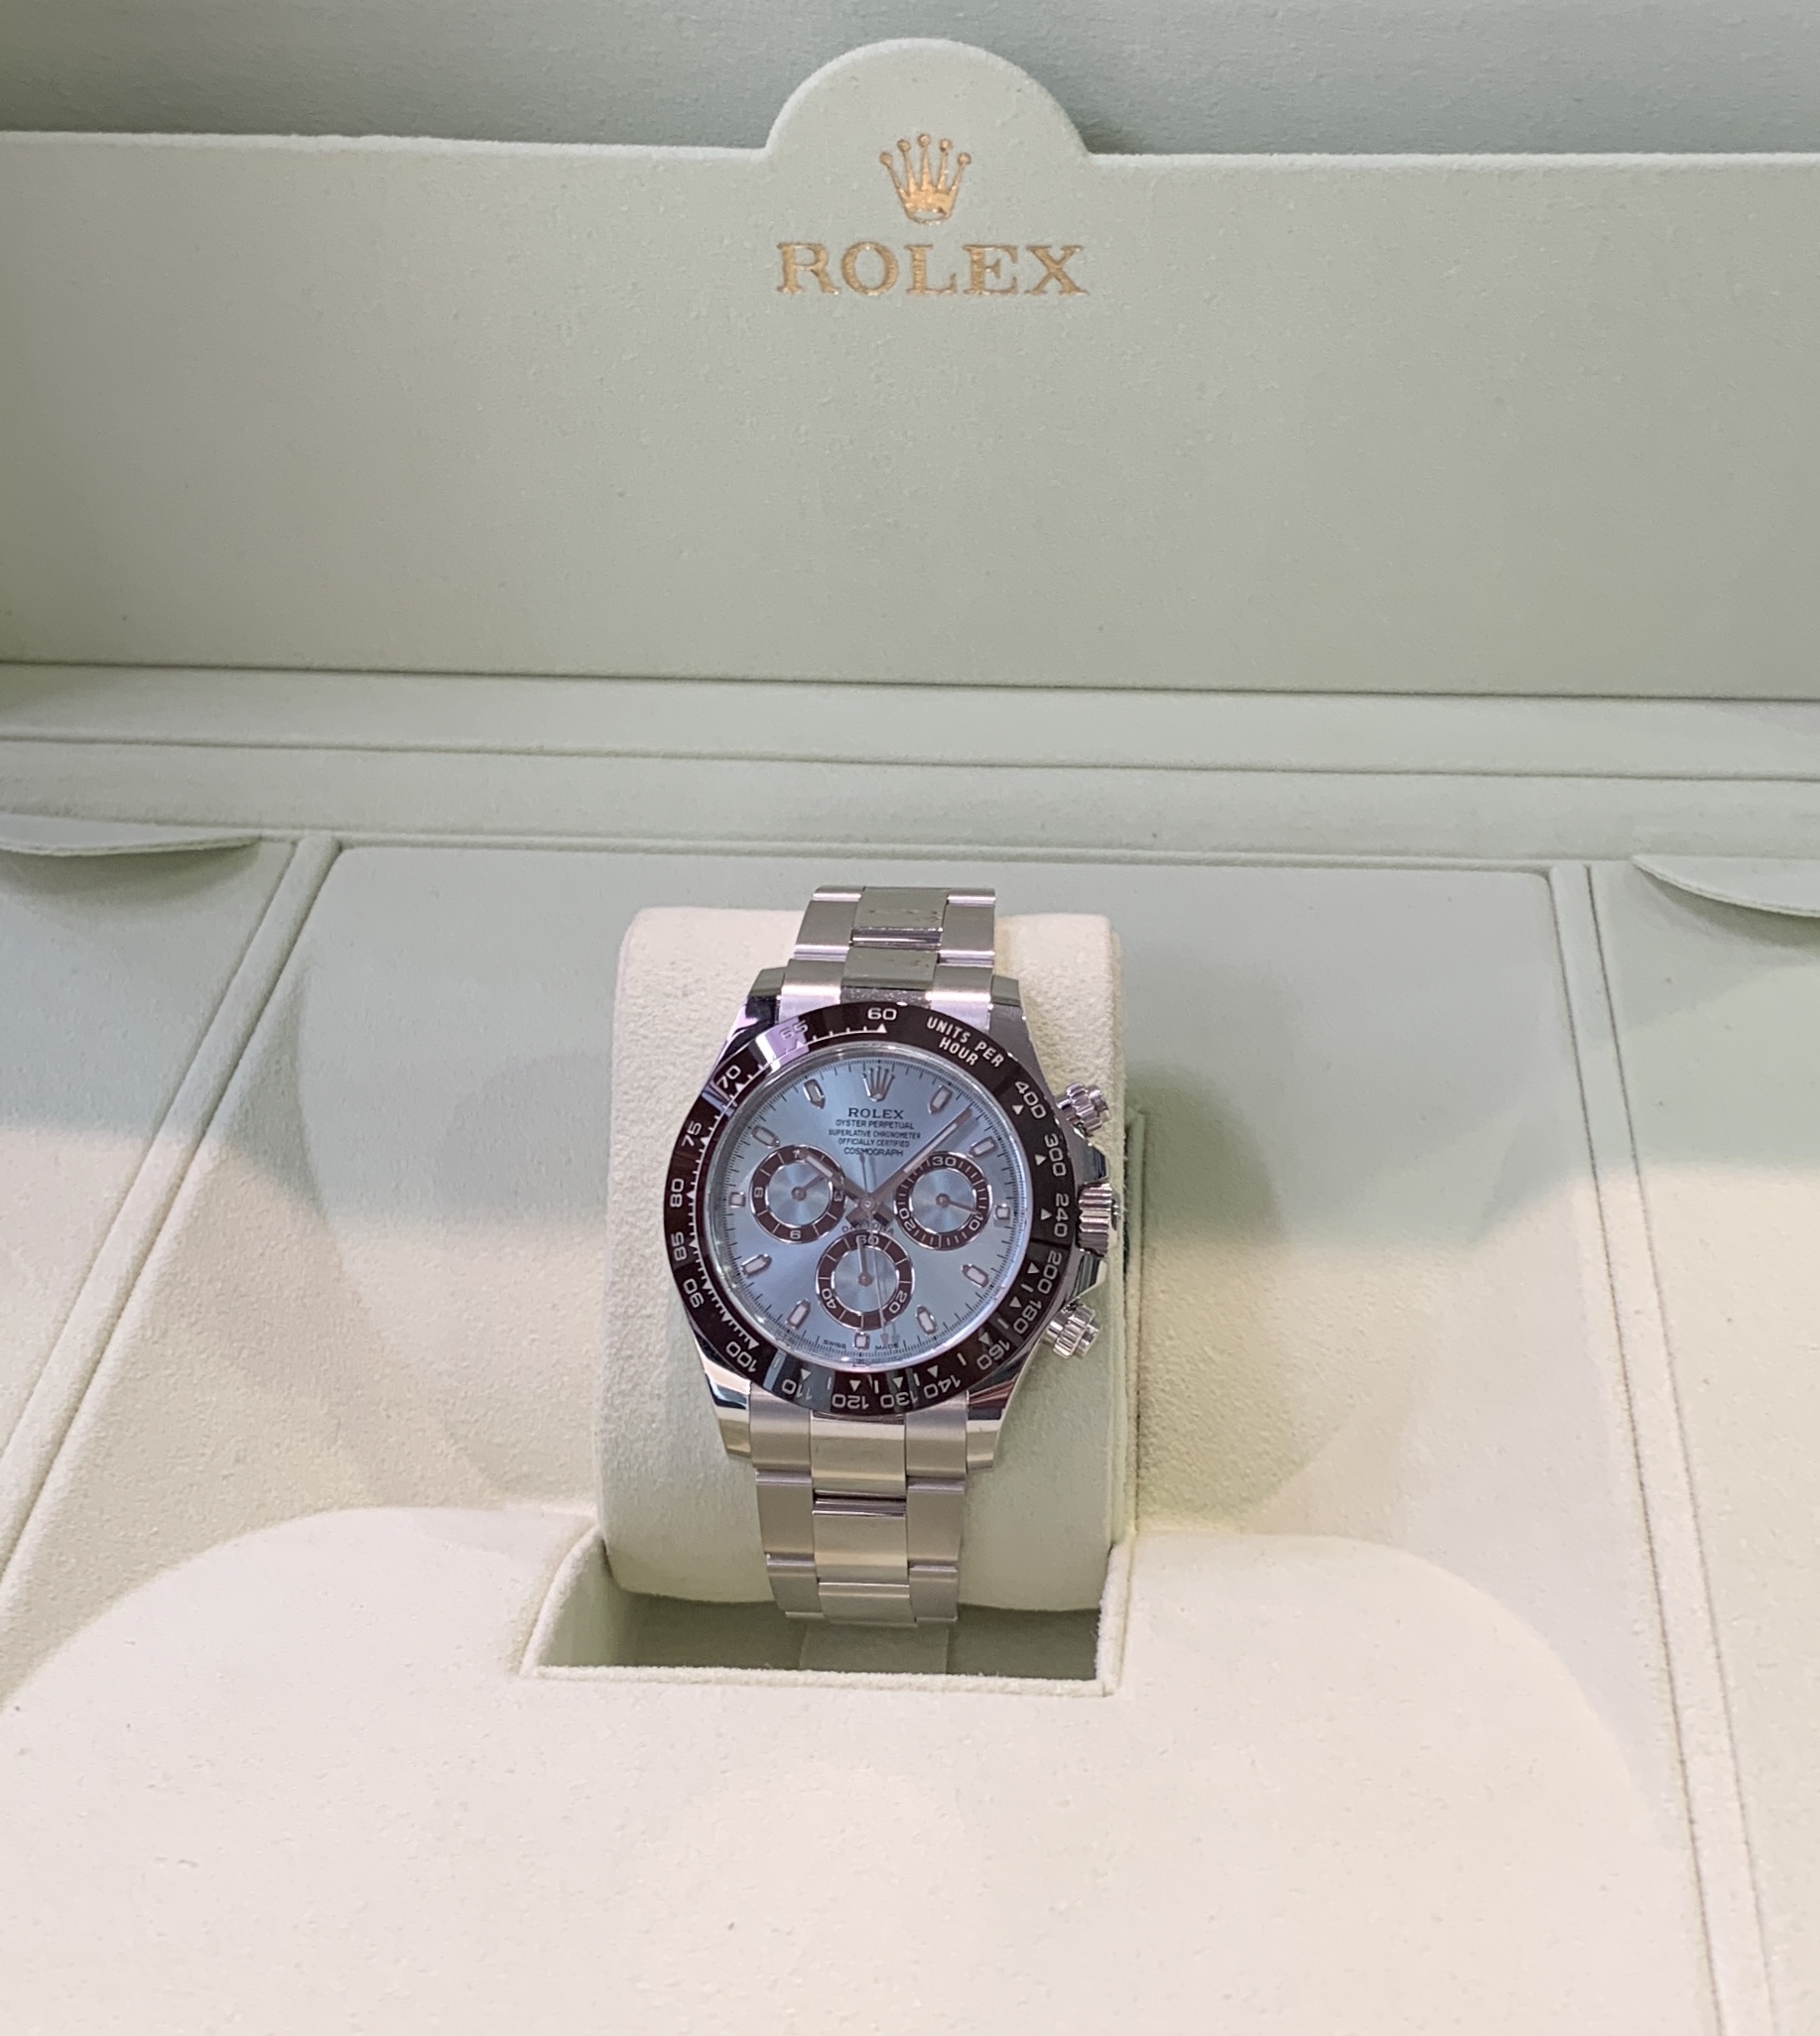 Rolex Daytona in with the ice blue dial 116506 - Watches